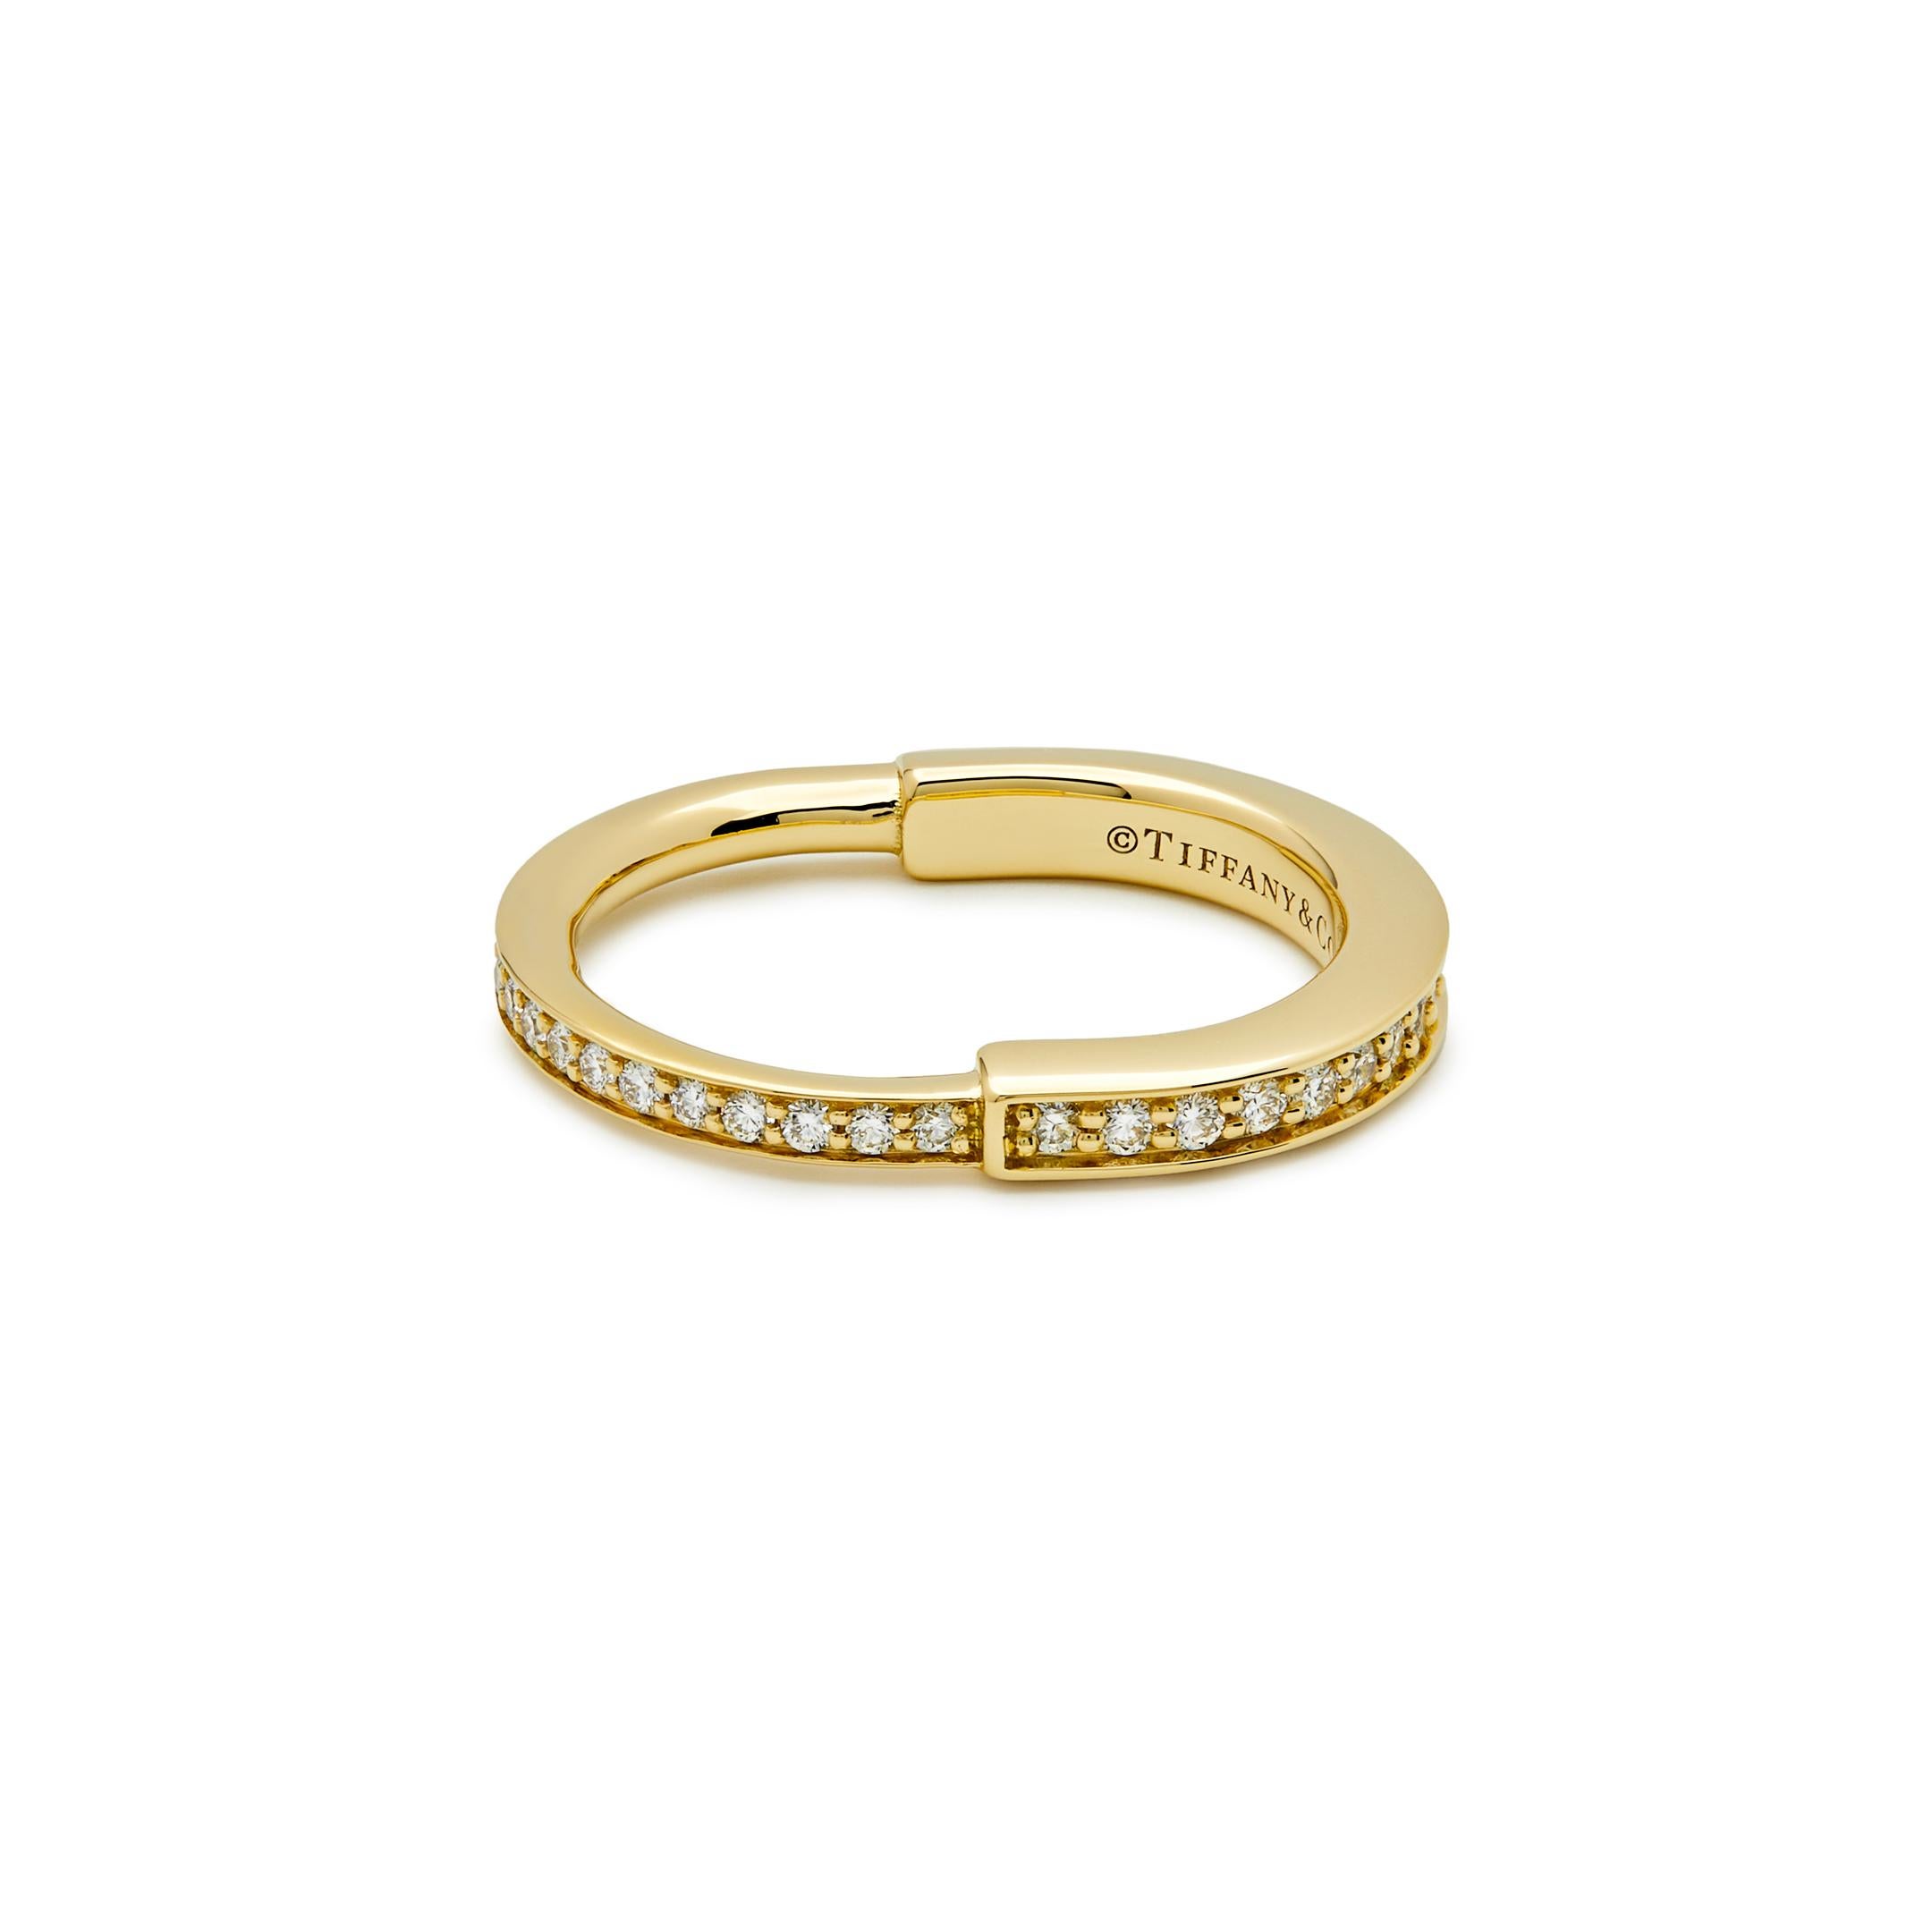 Tiffany & Co. Lock Ring in Yellow Gold with Pavé Diamonds 72343786 In New Condition For Sale In New York, NY